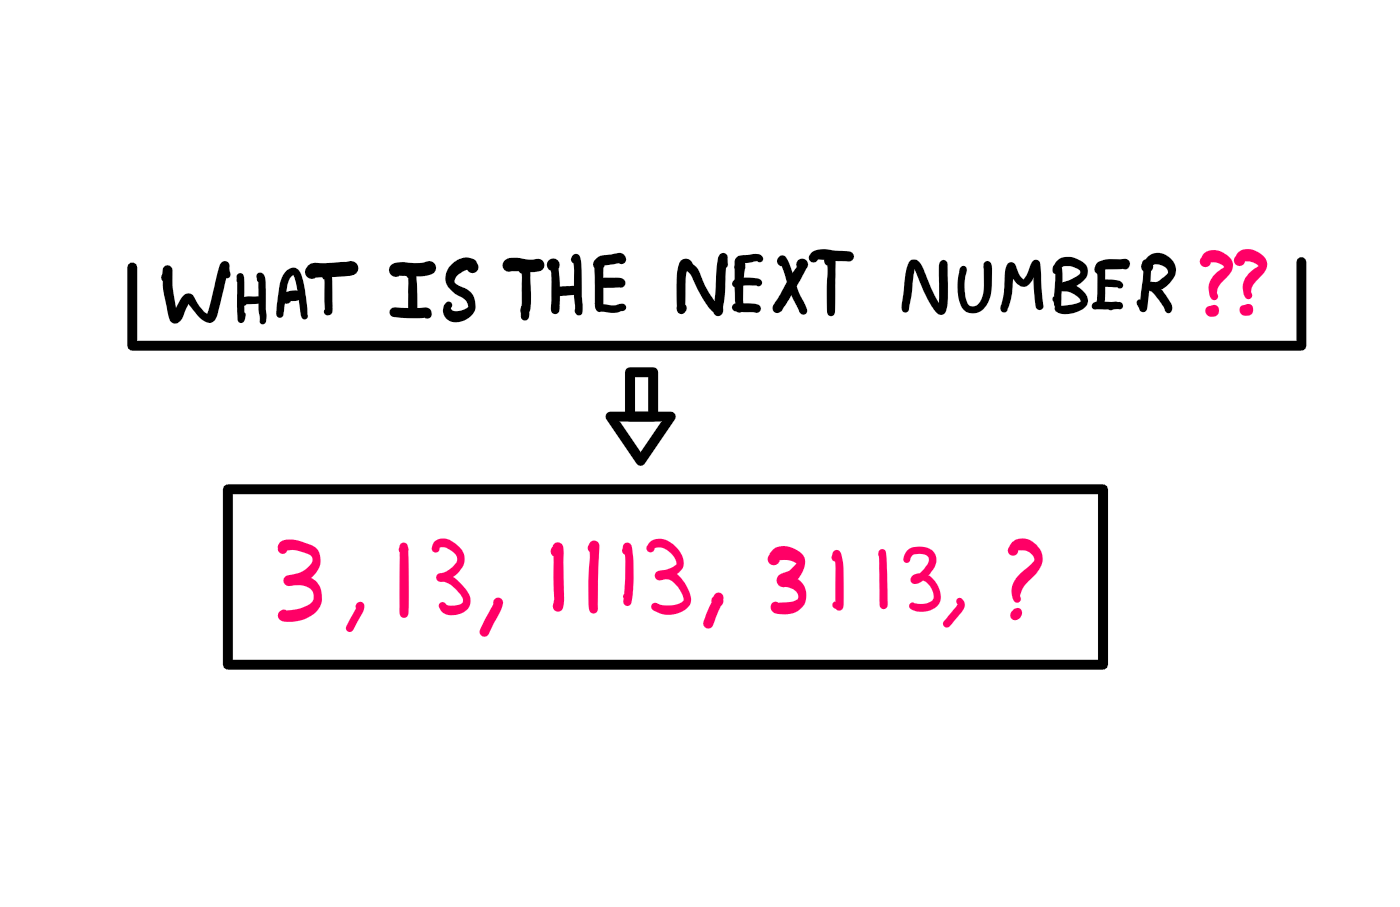 How To Find The Next Number In The Sequence? - A whiteboard style illustration showing the following number sequence: 3, 13, 1113, 3113, ? Above this sequence, the following question is posed: "What is the next number?"